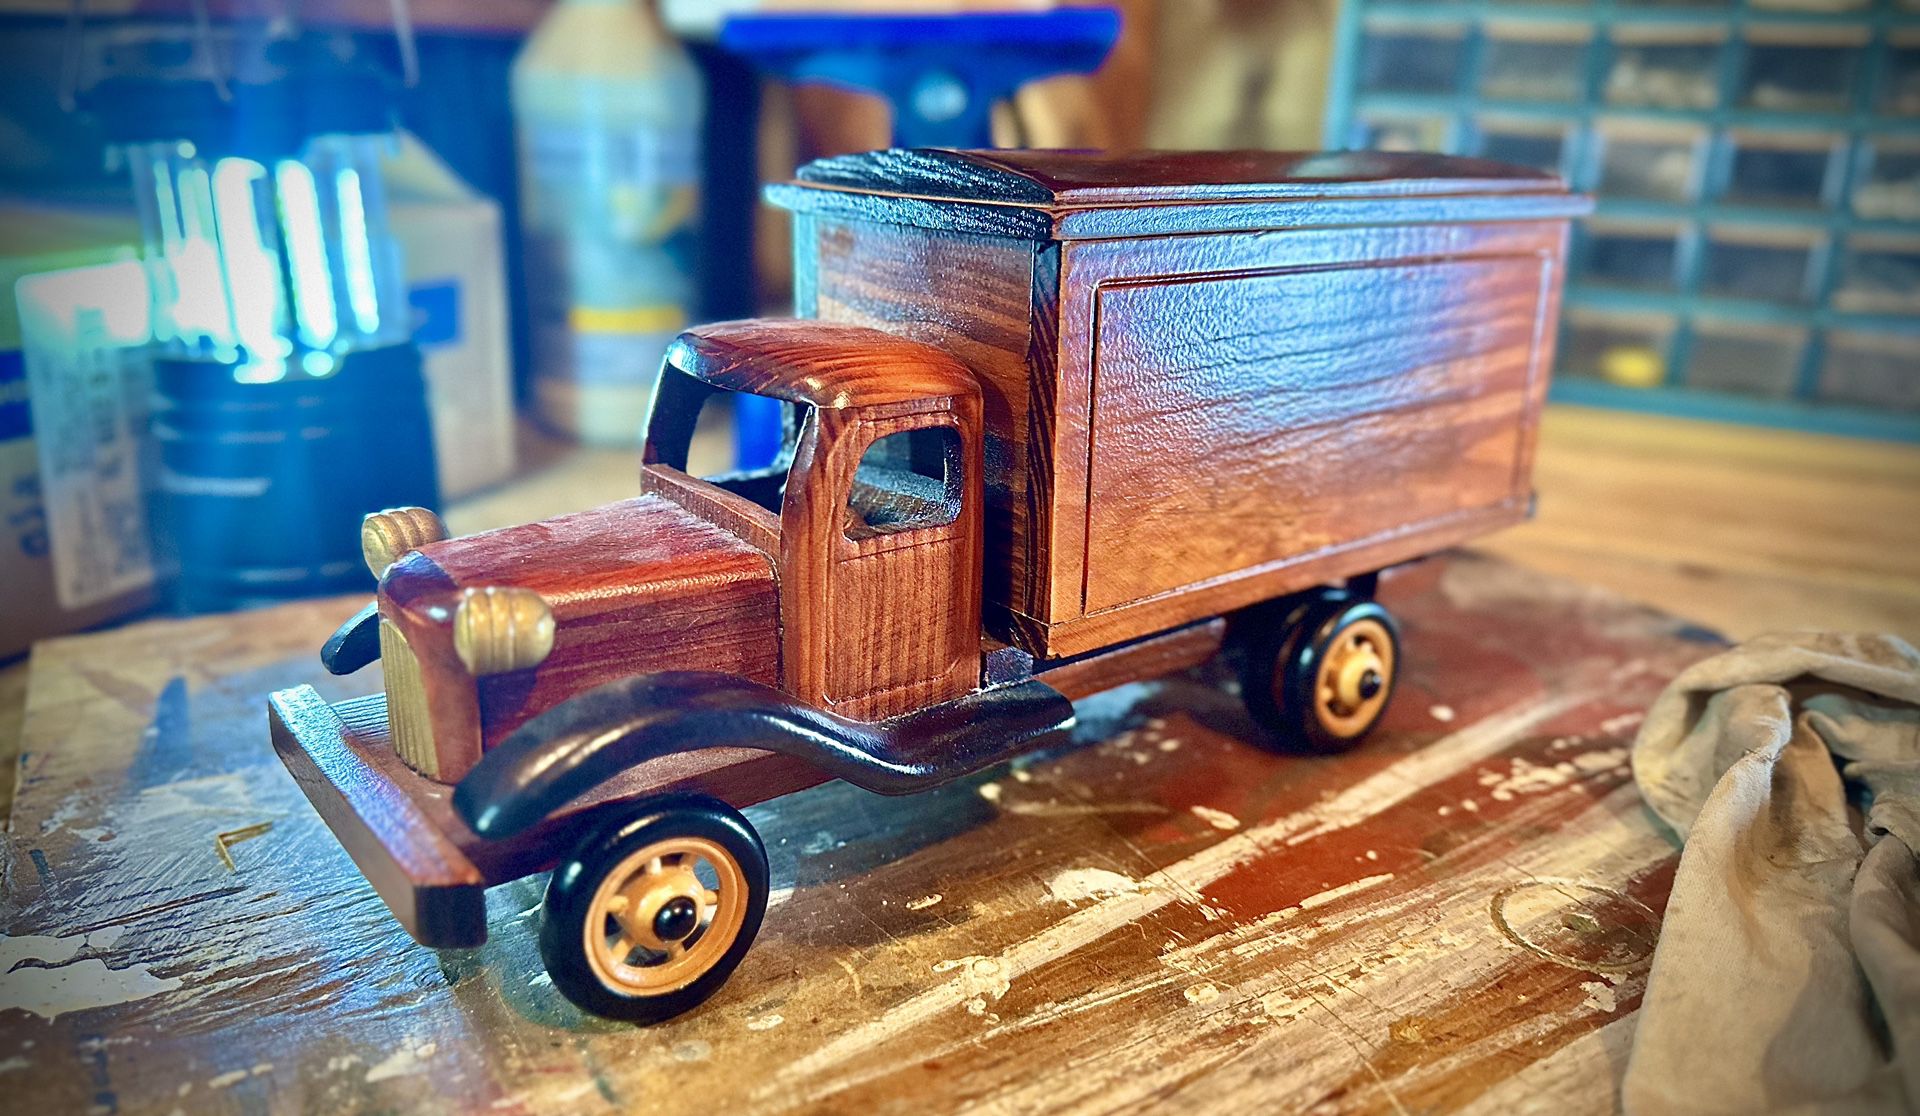 Wooden hand crafted toy trucks